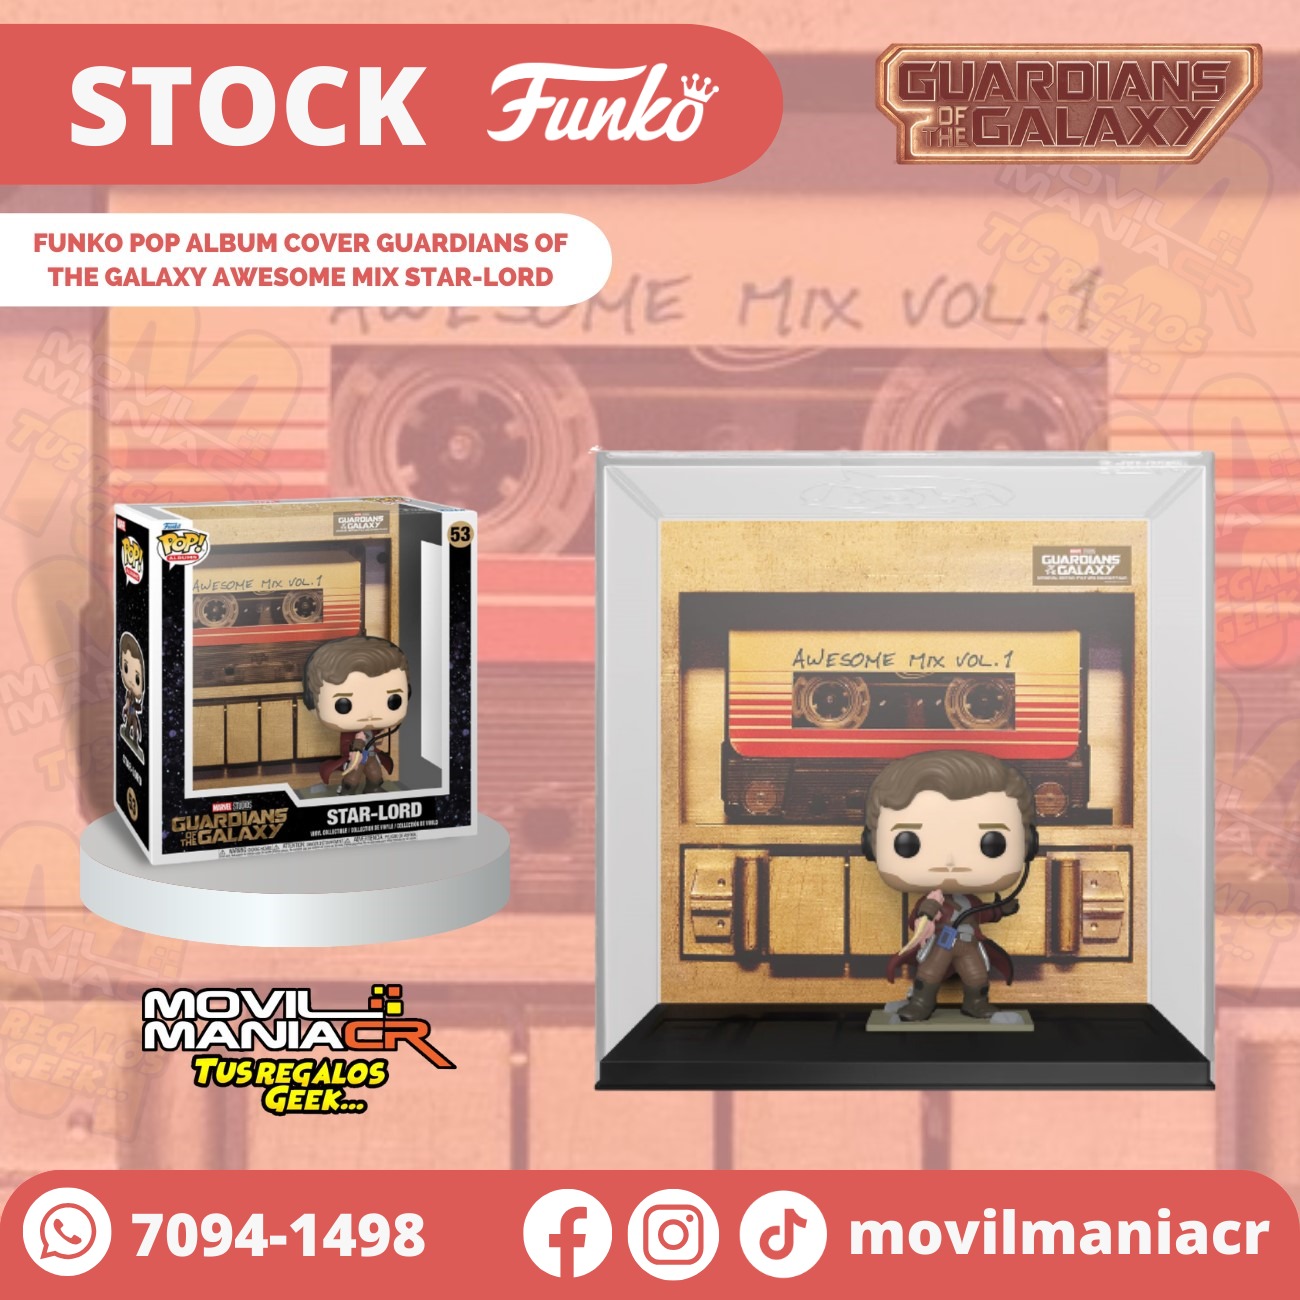 Funko Pop Album Cover Guardians of the Galaxy Awesome Mix Star-Lord #53